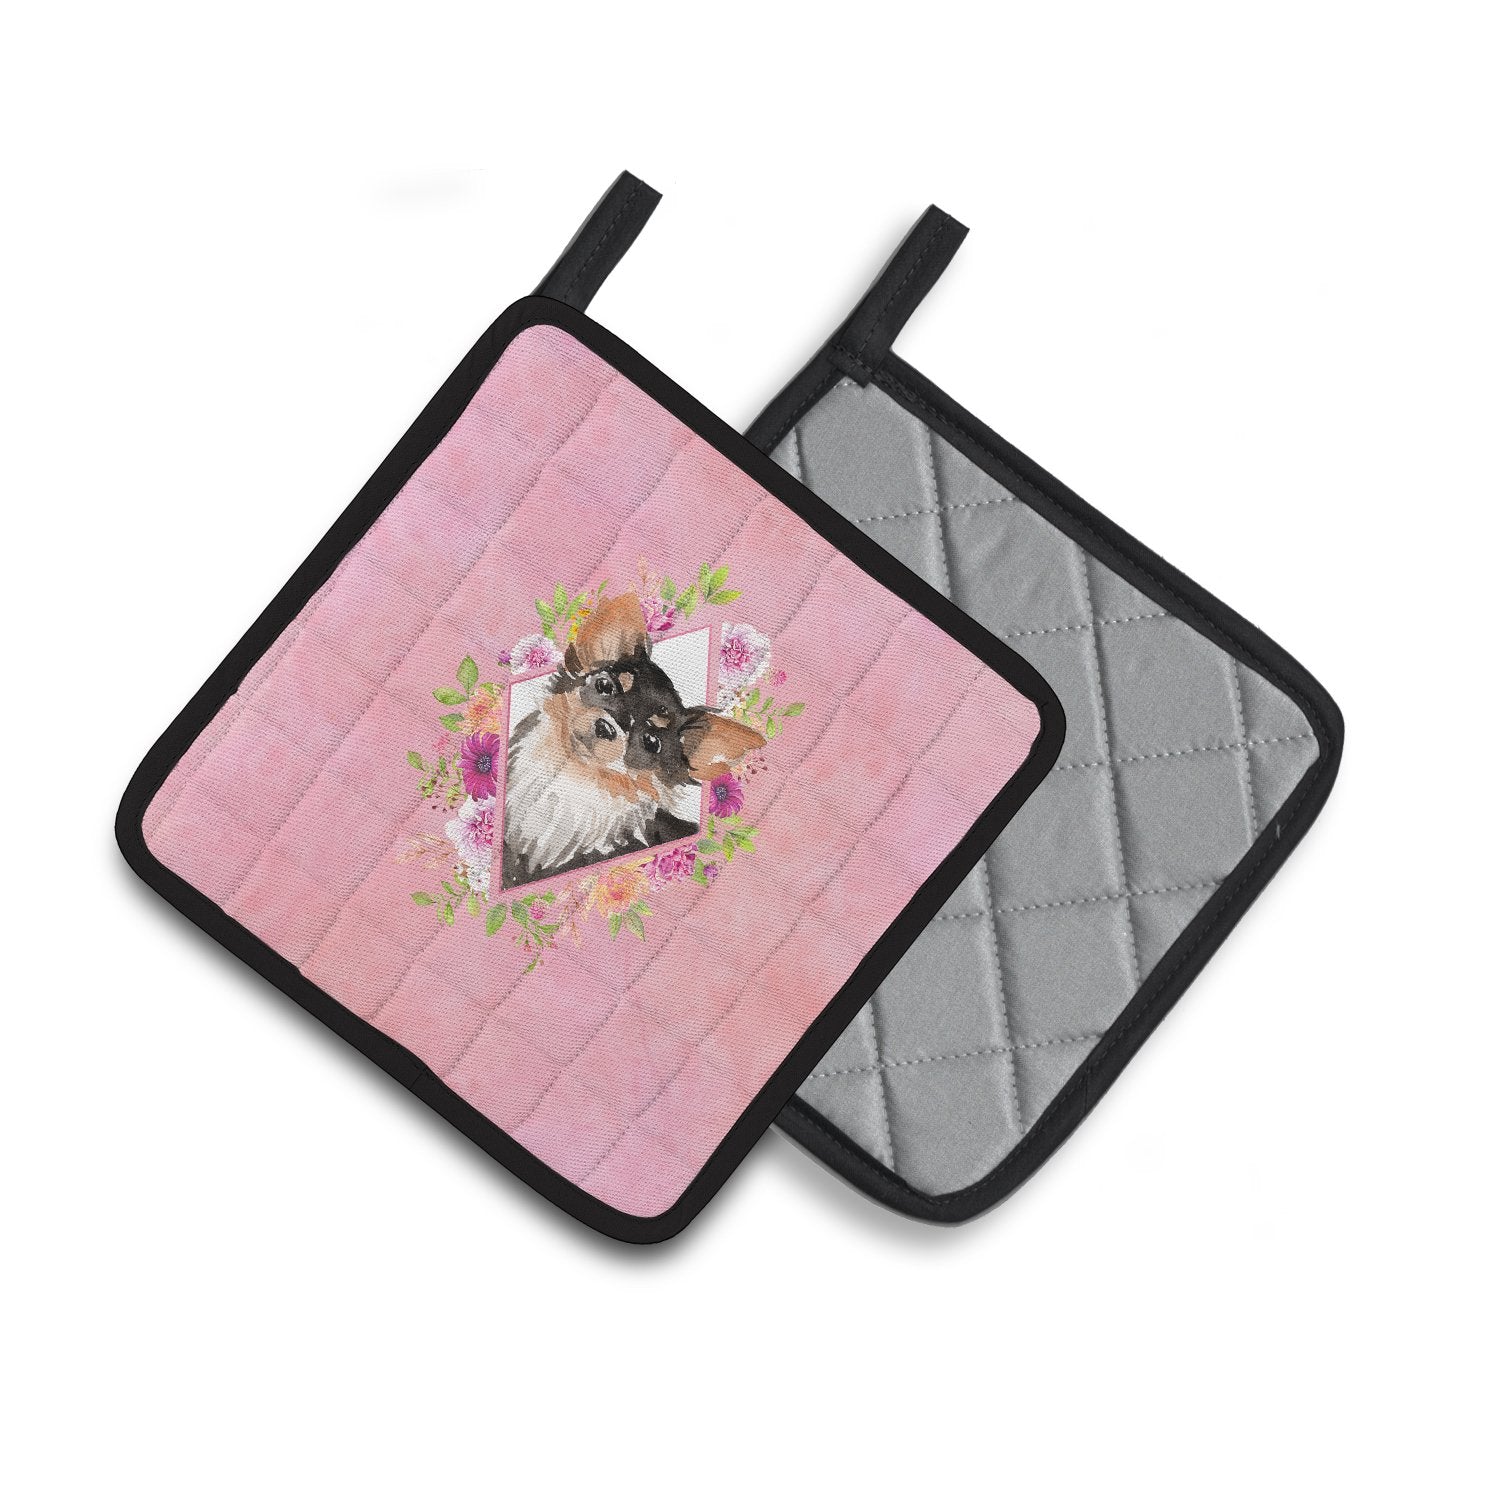 Longhaired Chihuahua Pink Flowers Pair of Pot Holders CK4225PTHD by Caroline's Treasures